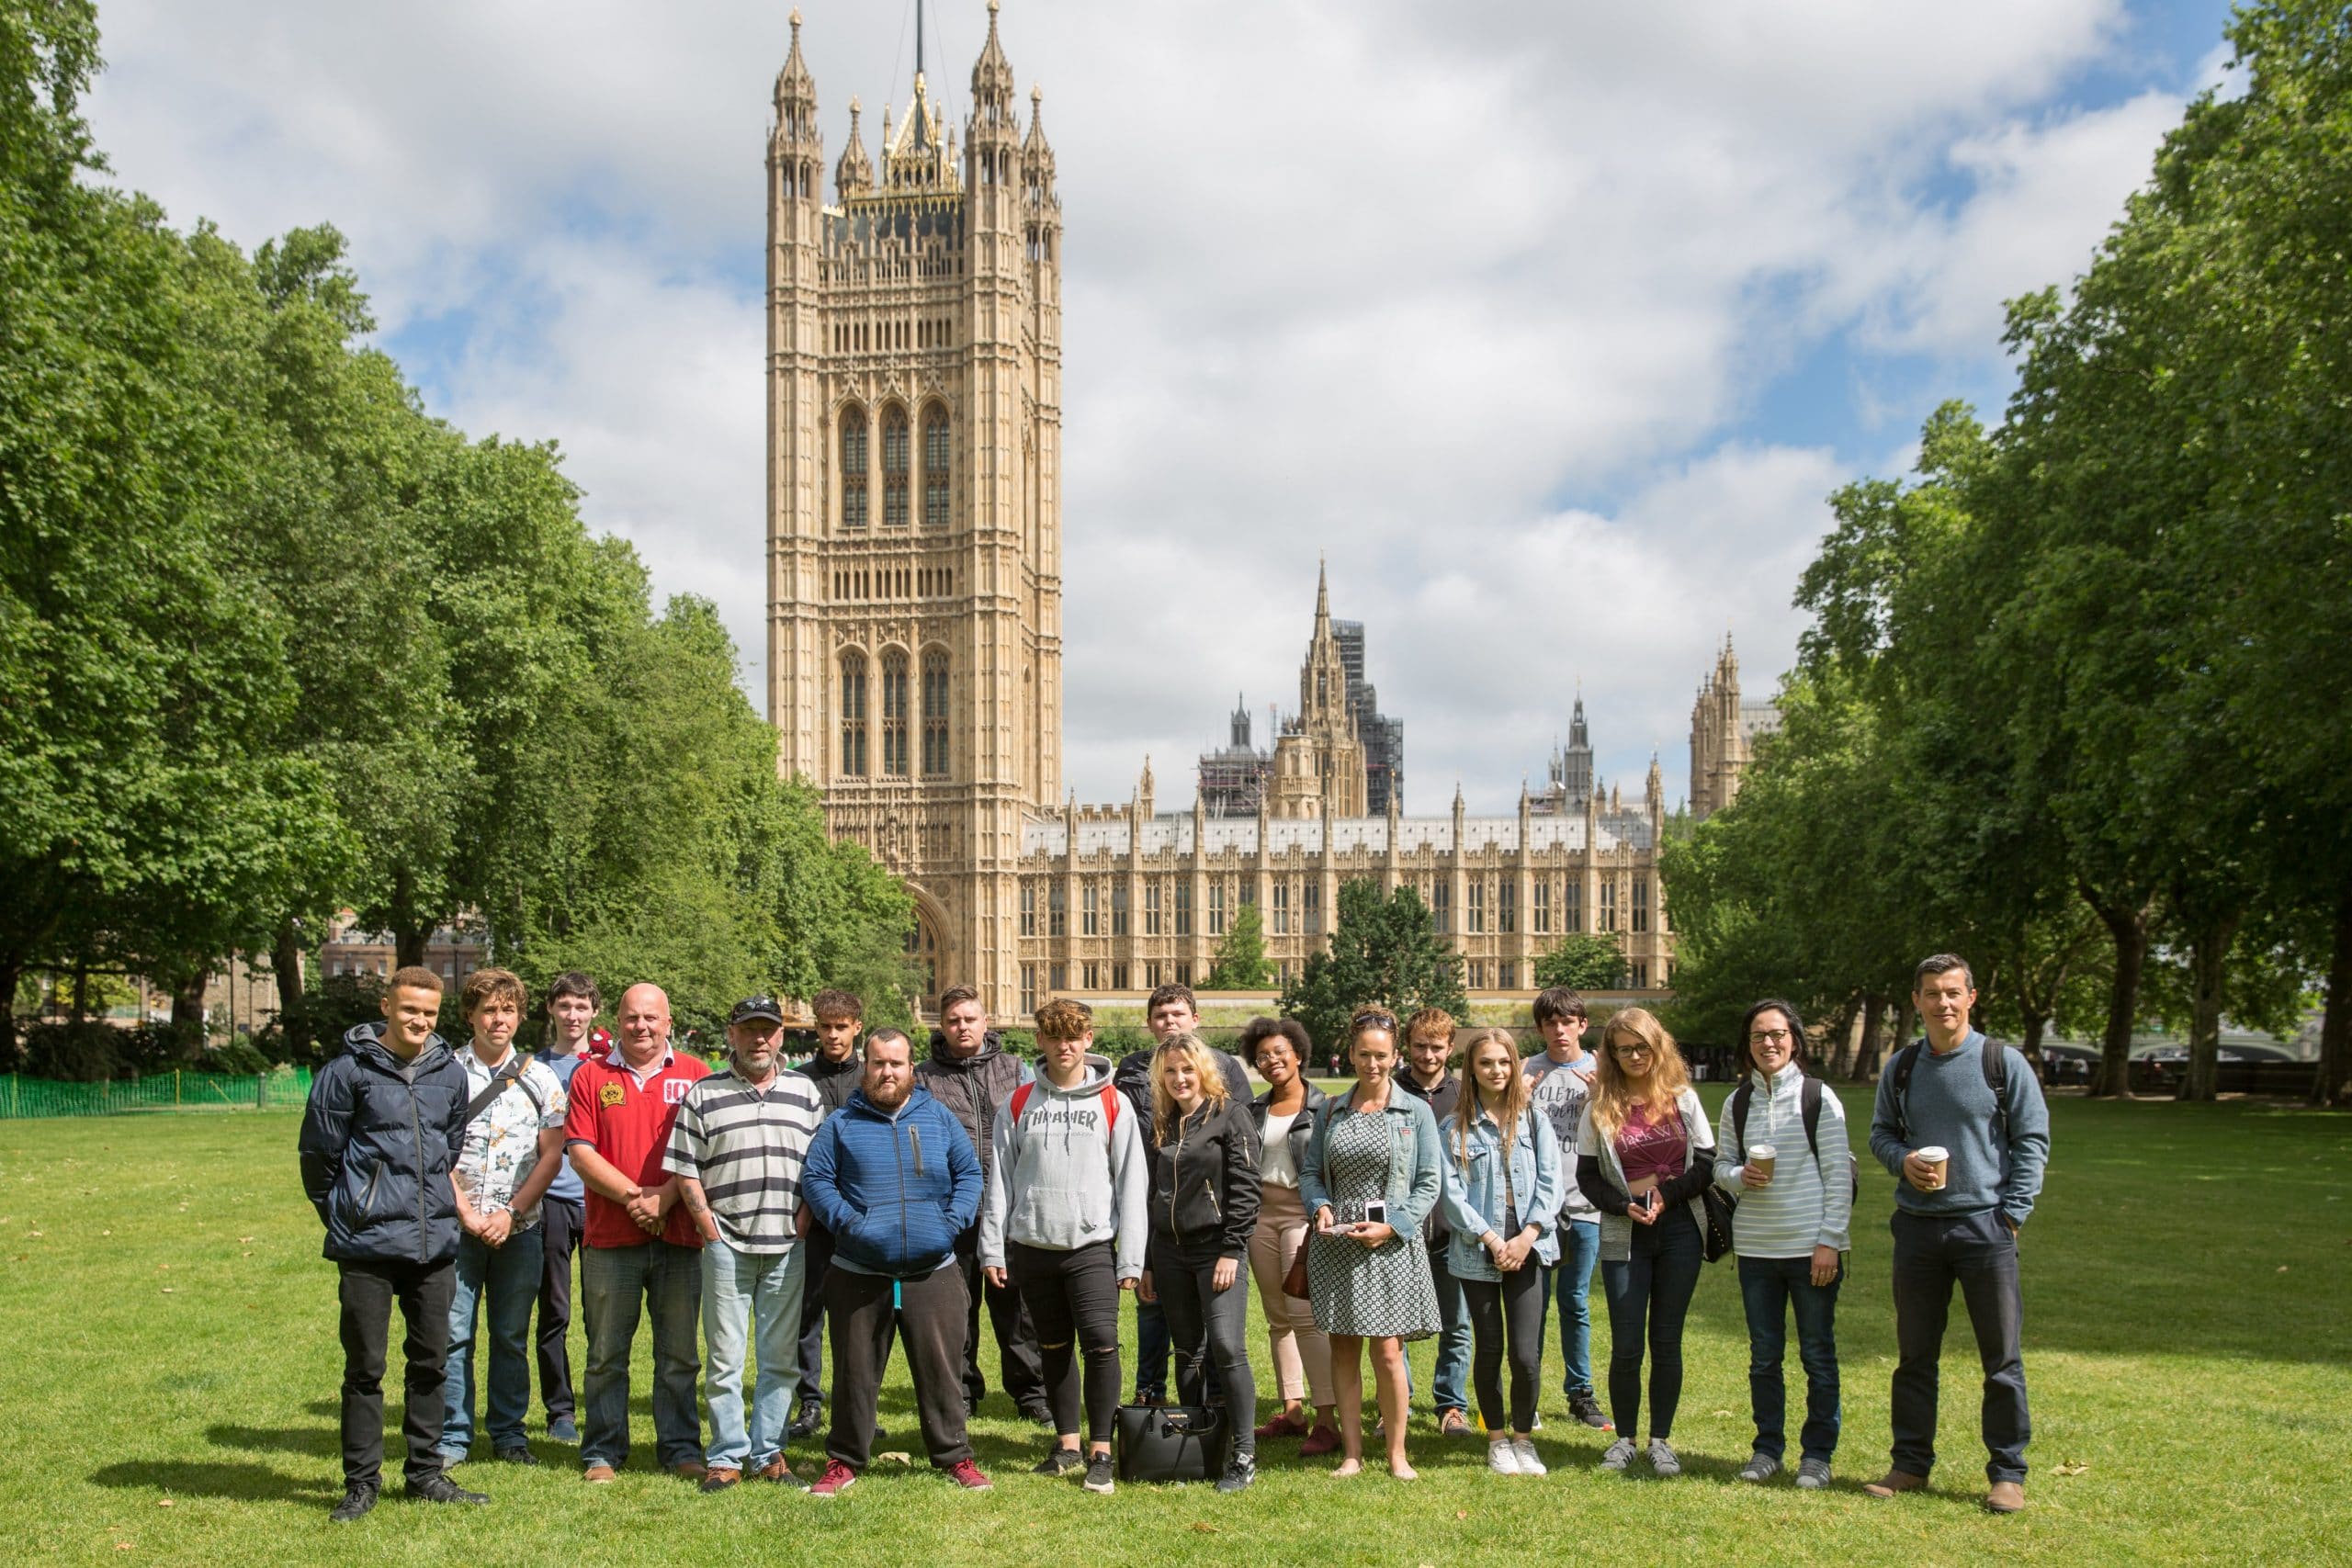 A group of young people stands in front of the Houses of Parliament building